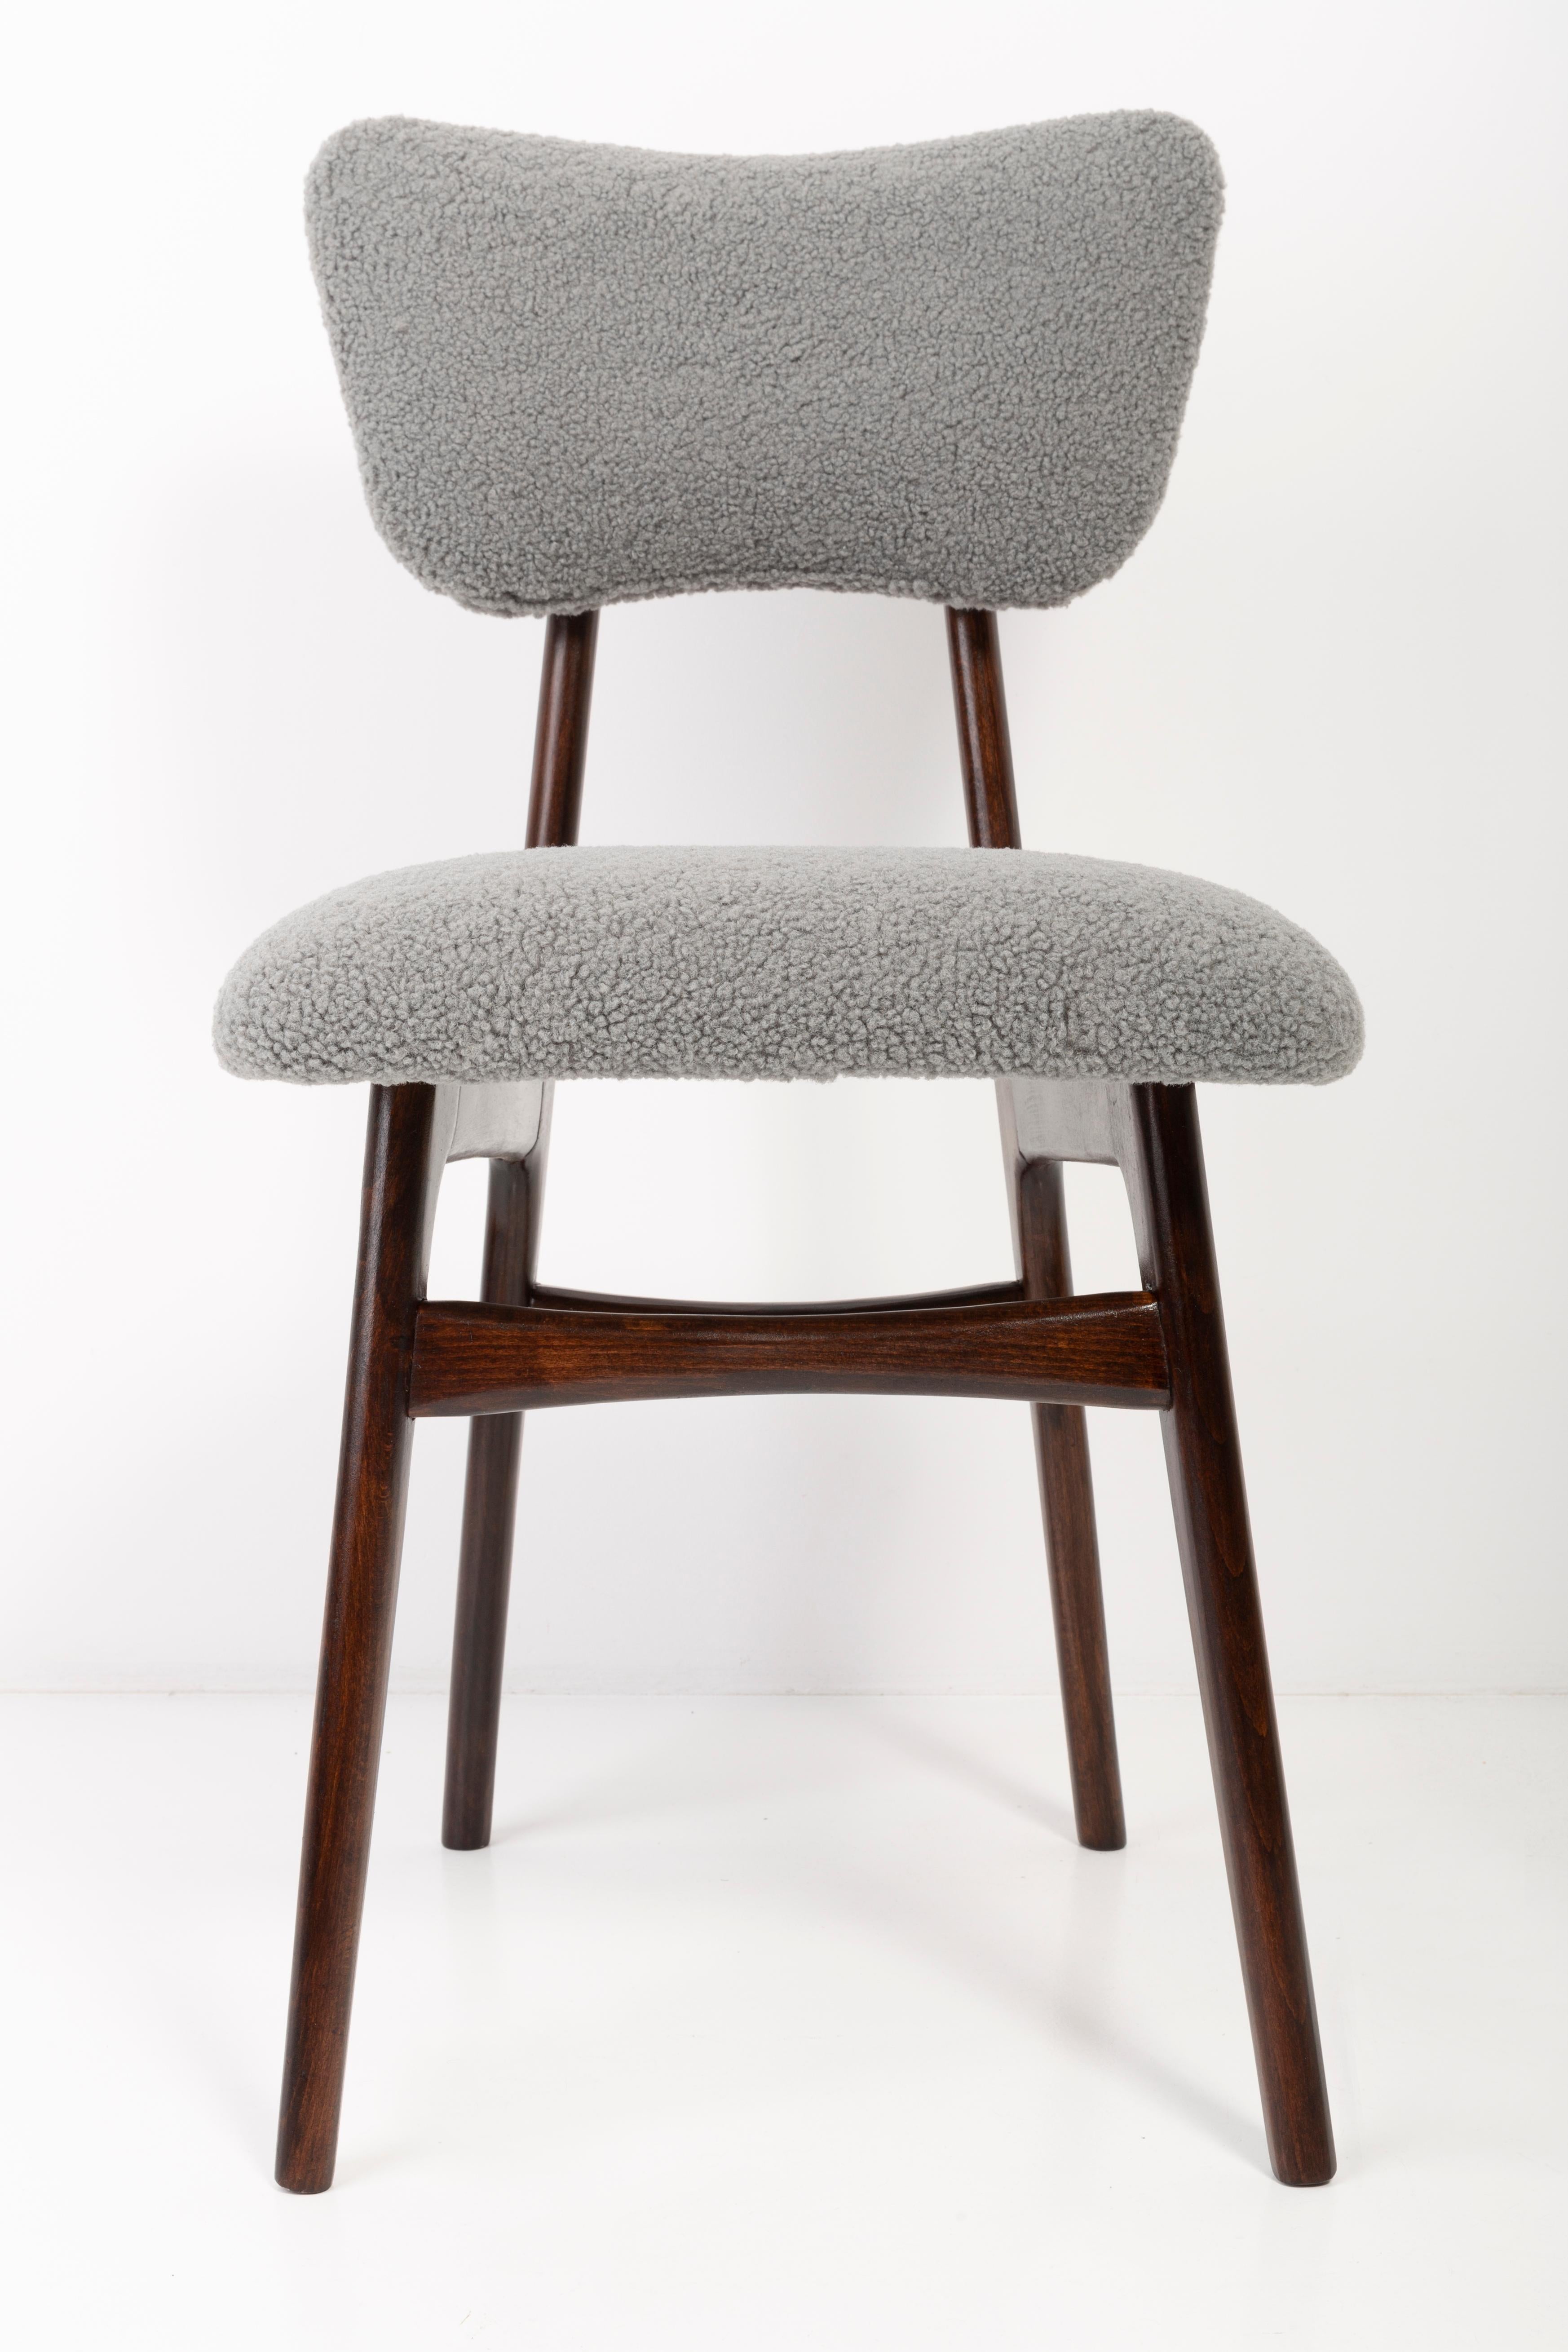 Set of Twelve 20th Century Gray Boucle Chairs, 1960s For Sale 6